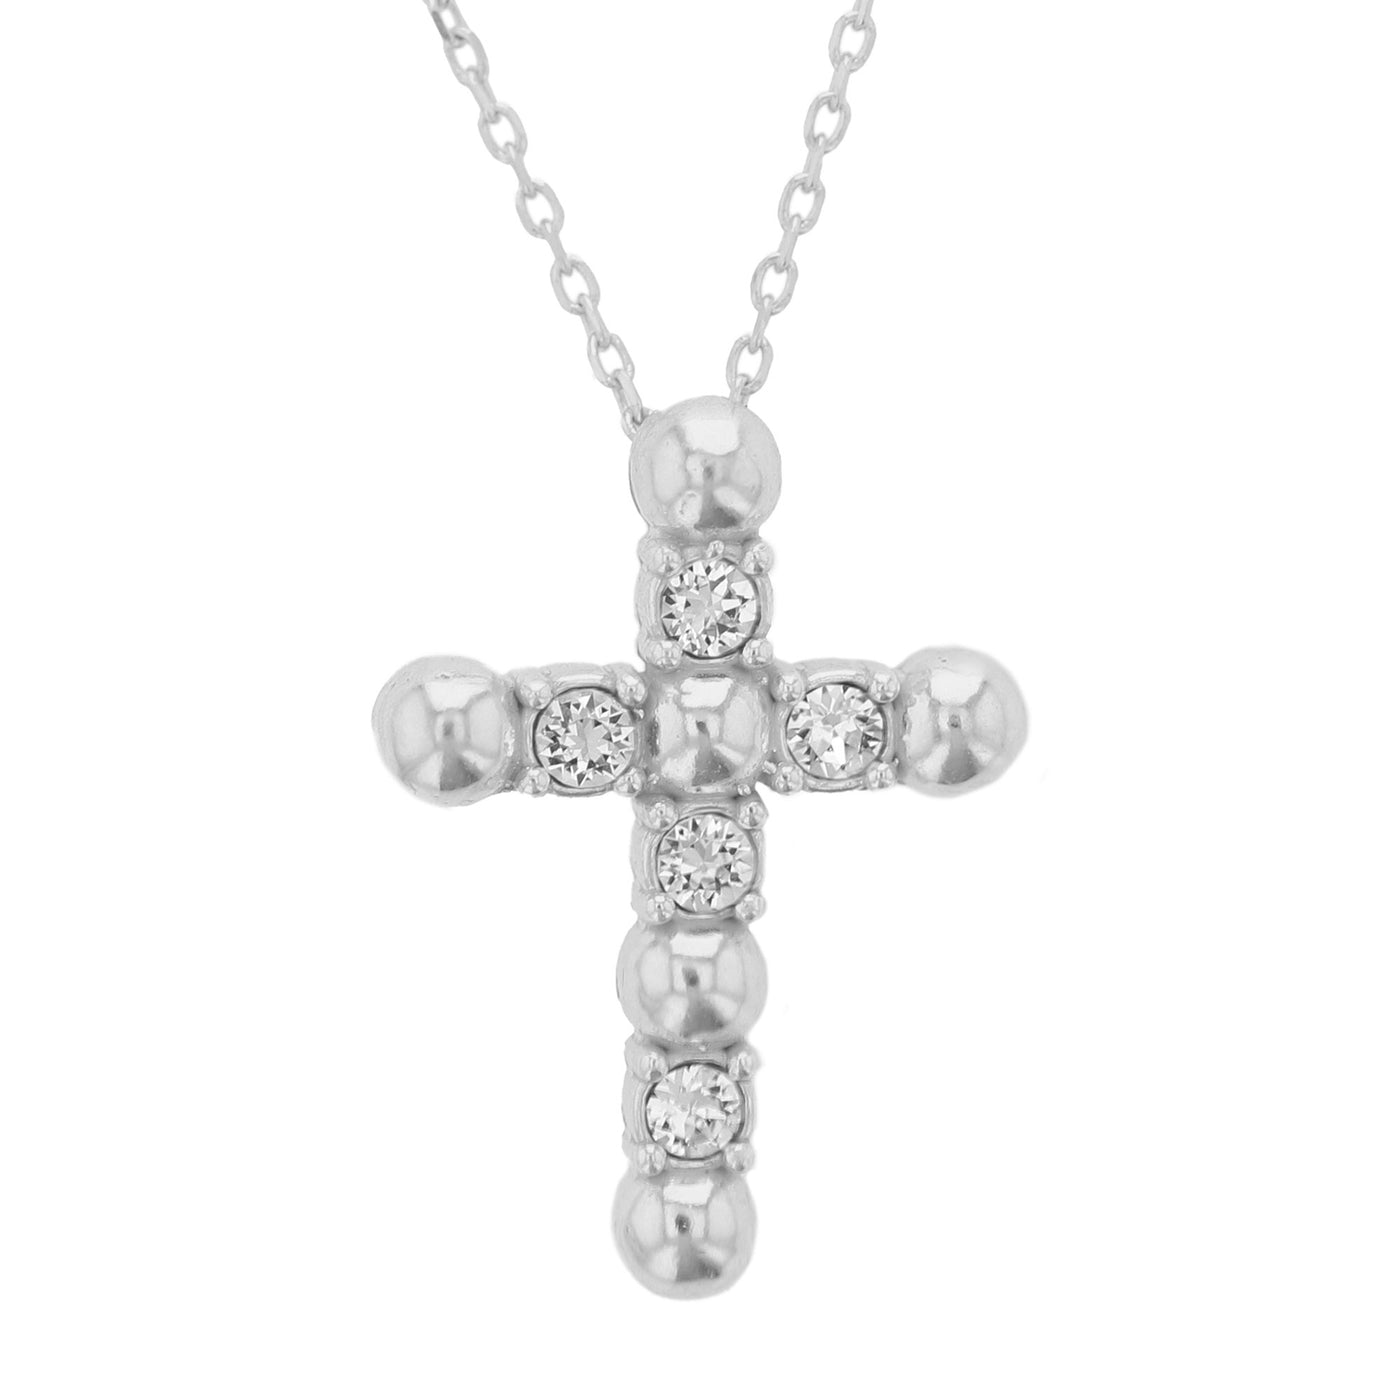 Rebecca Sloane Sterling Silver Ball Cross Necklace with crystals